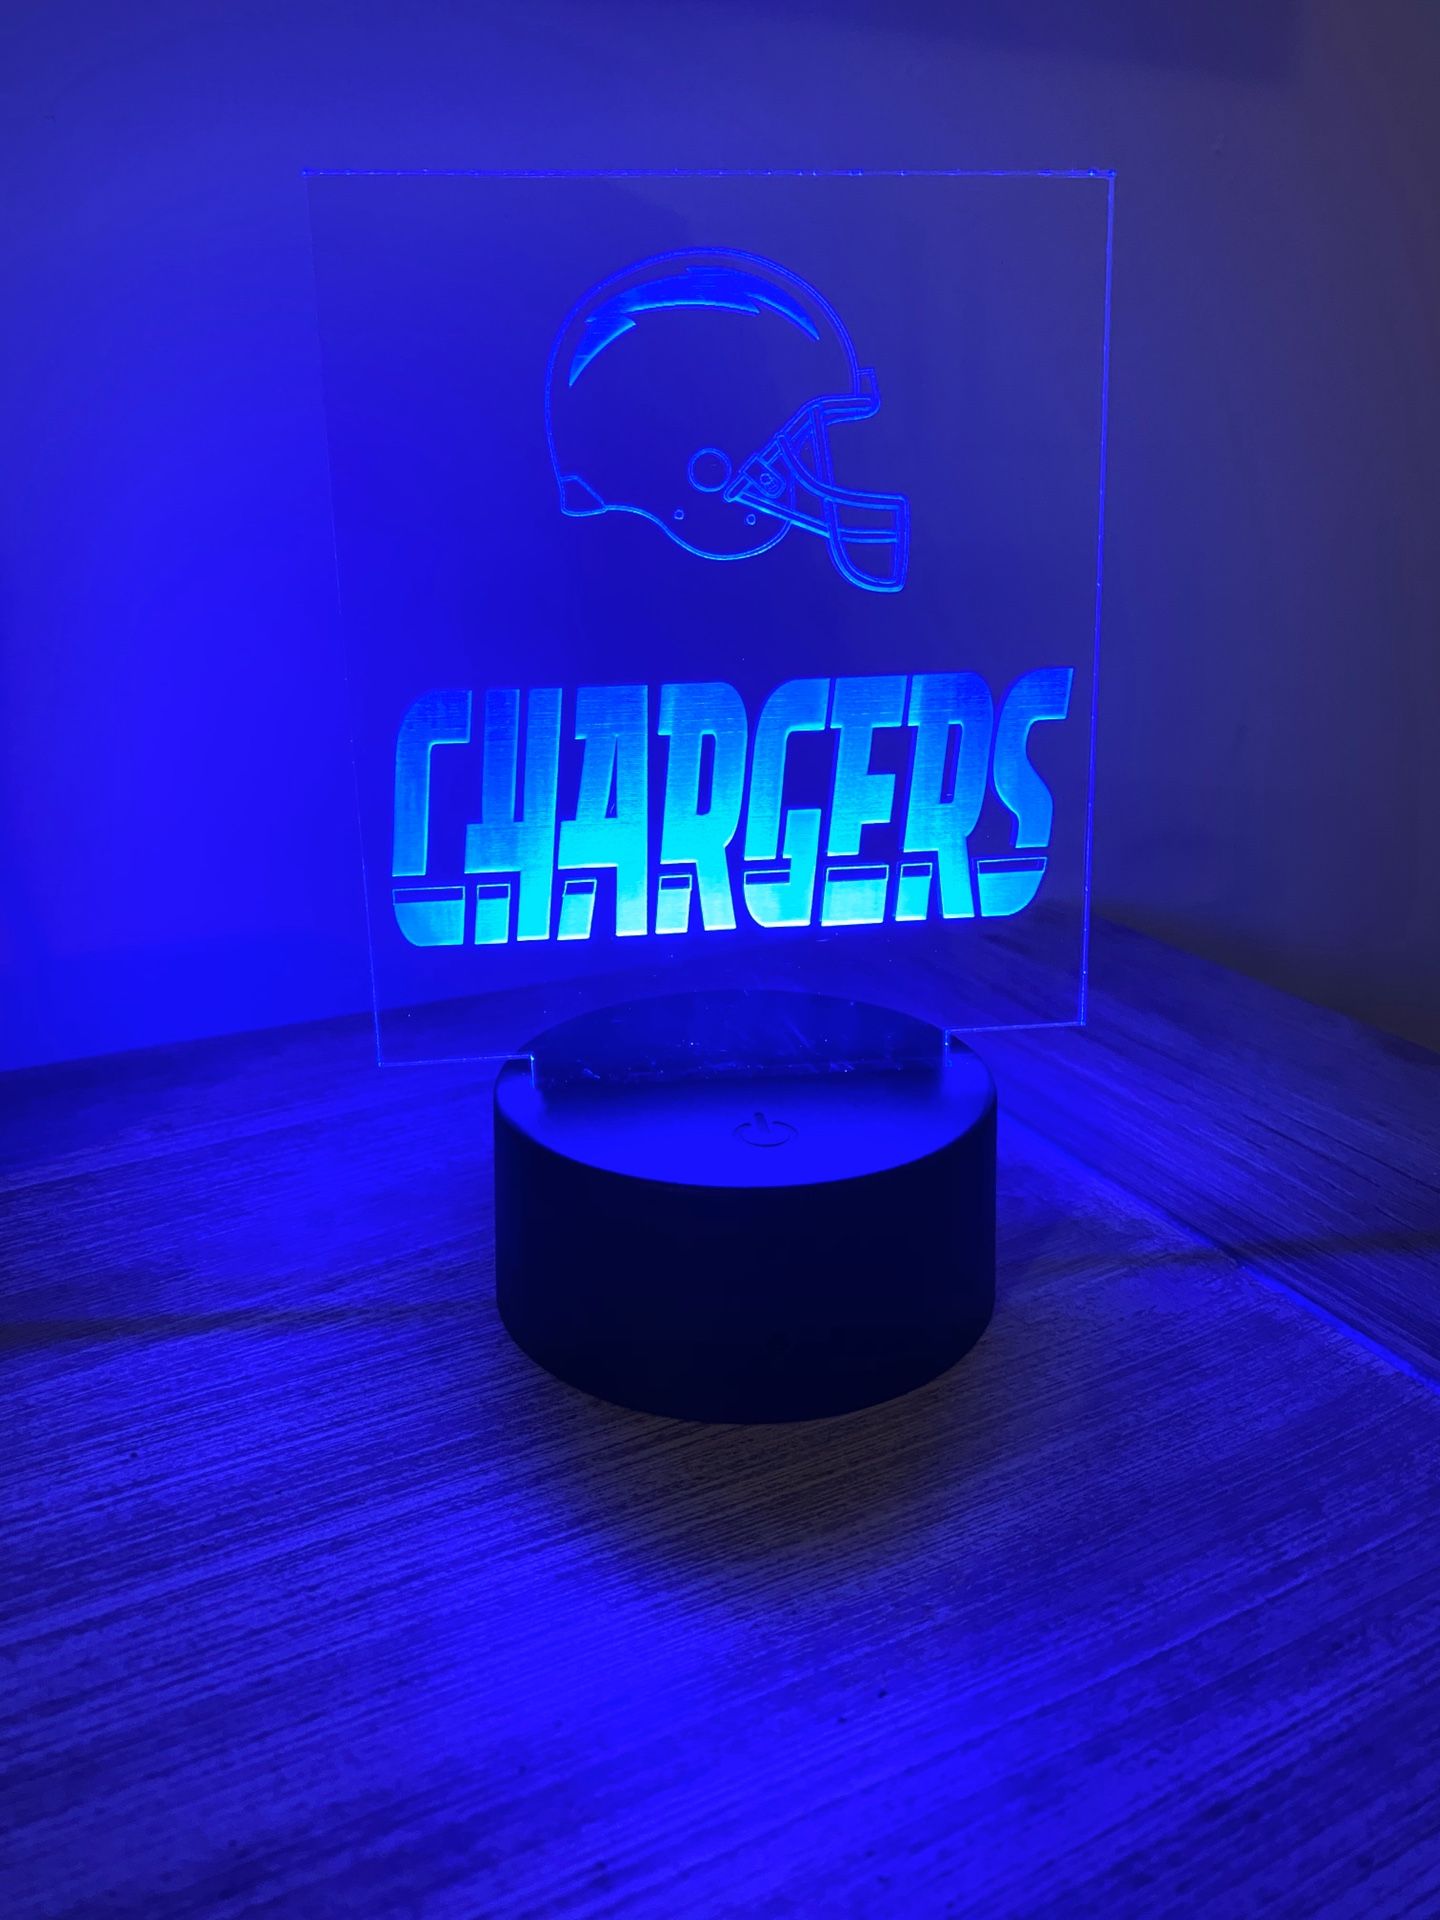 Chargers LED night lamp